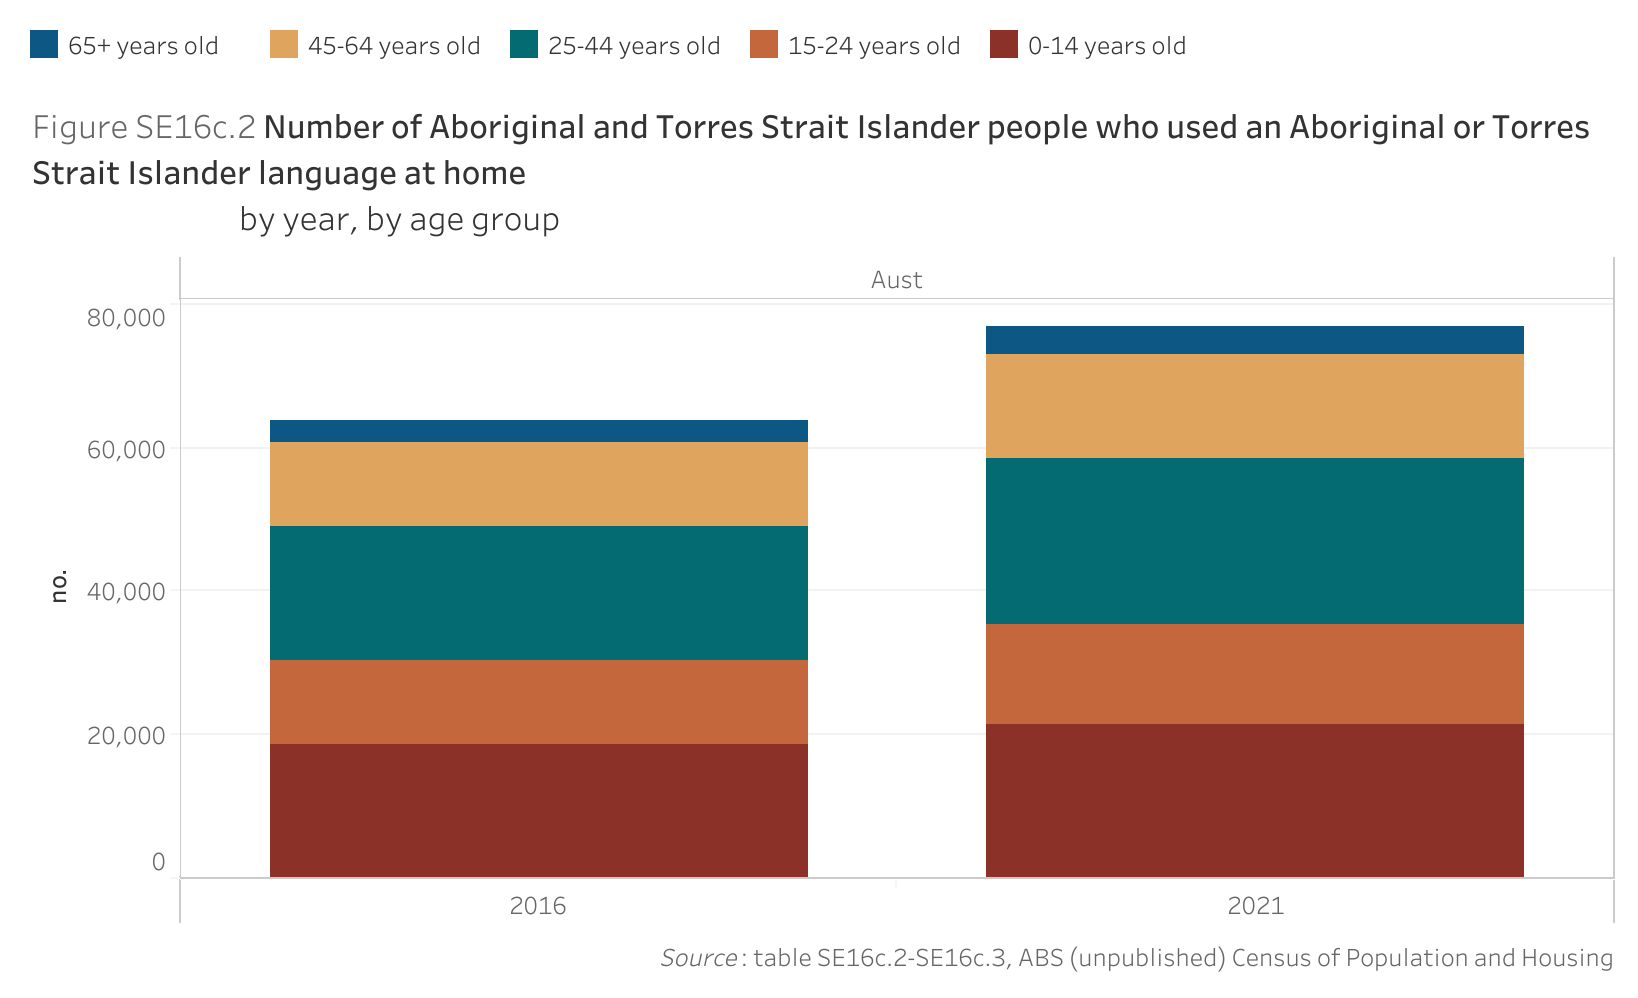 Figure SE16c.2 shows the number of Aboriginal and Torres Strait Islander people who used an Aboriginal or Torres Strait Islander language at home, by year, by age group. More details can be found within the text near this image.